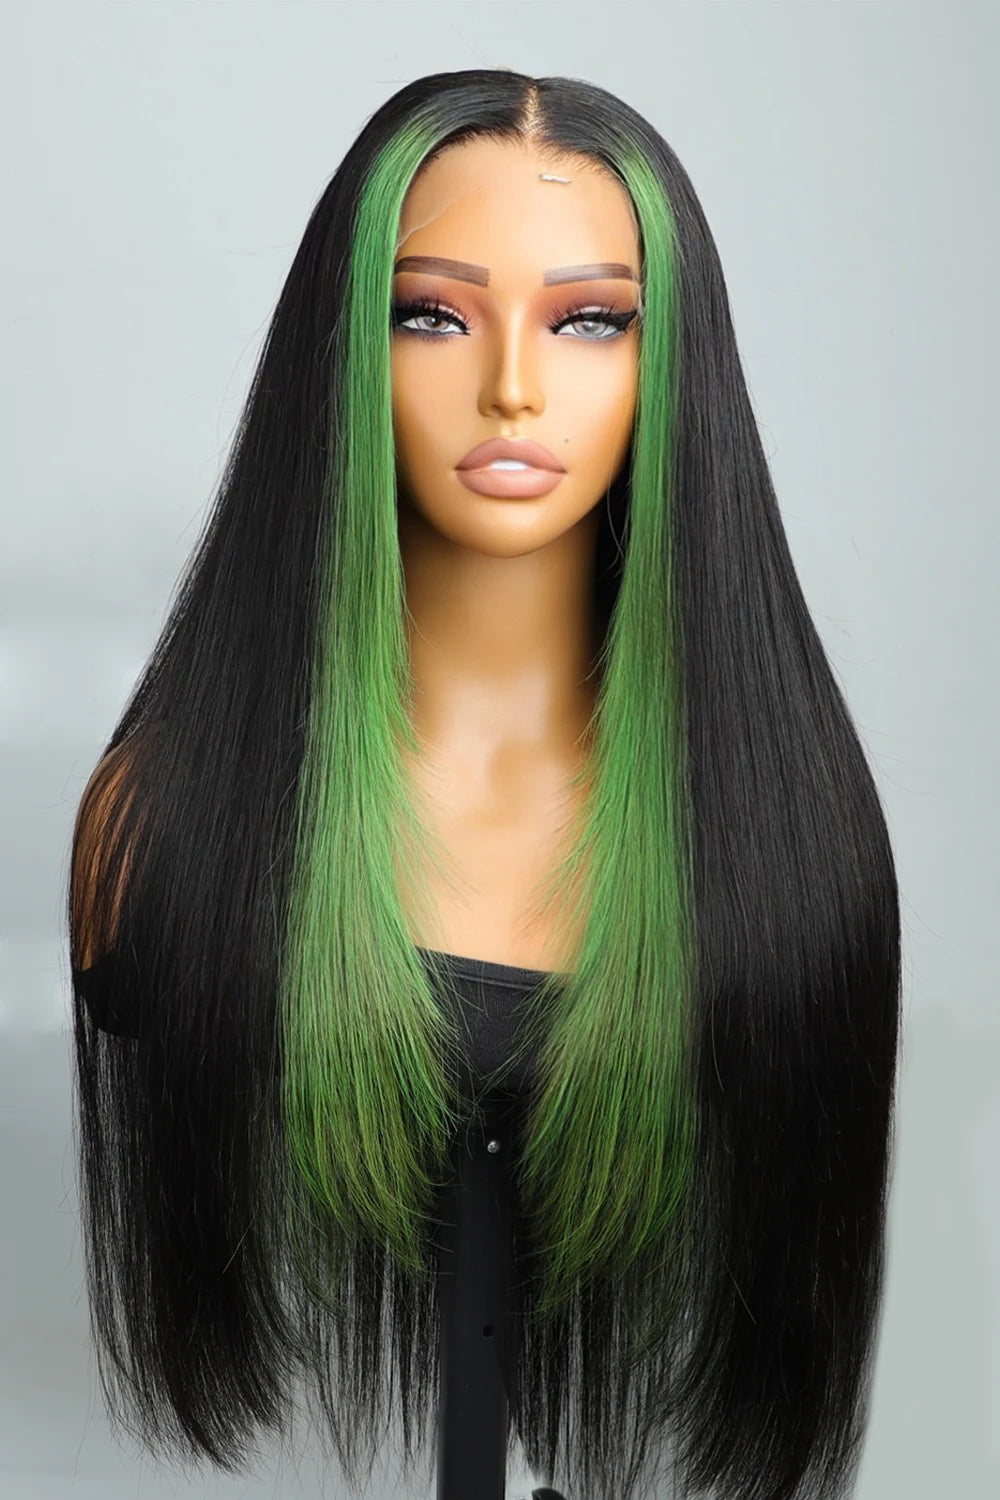 Straight green skunk stripe wig model front view